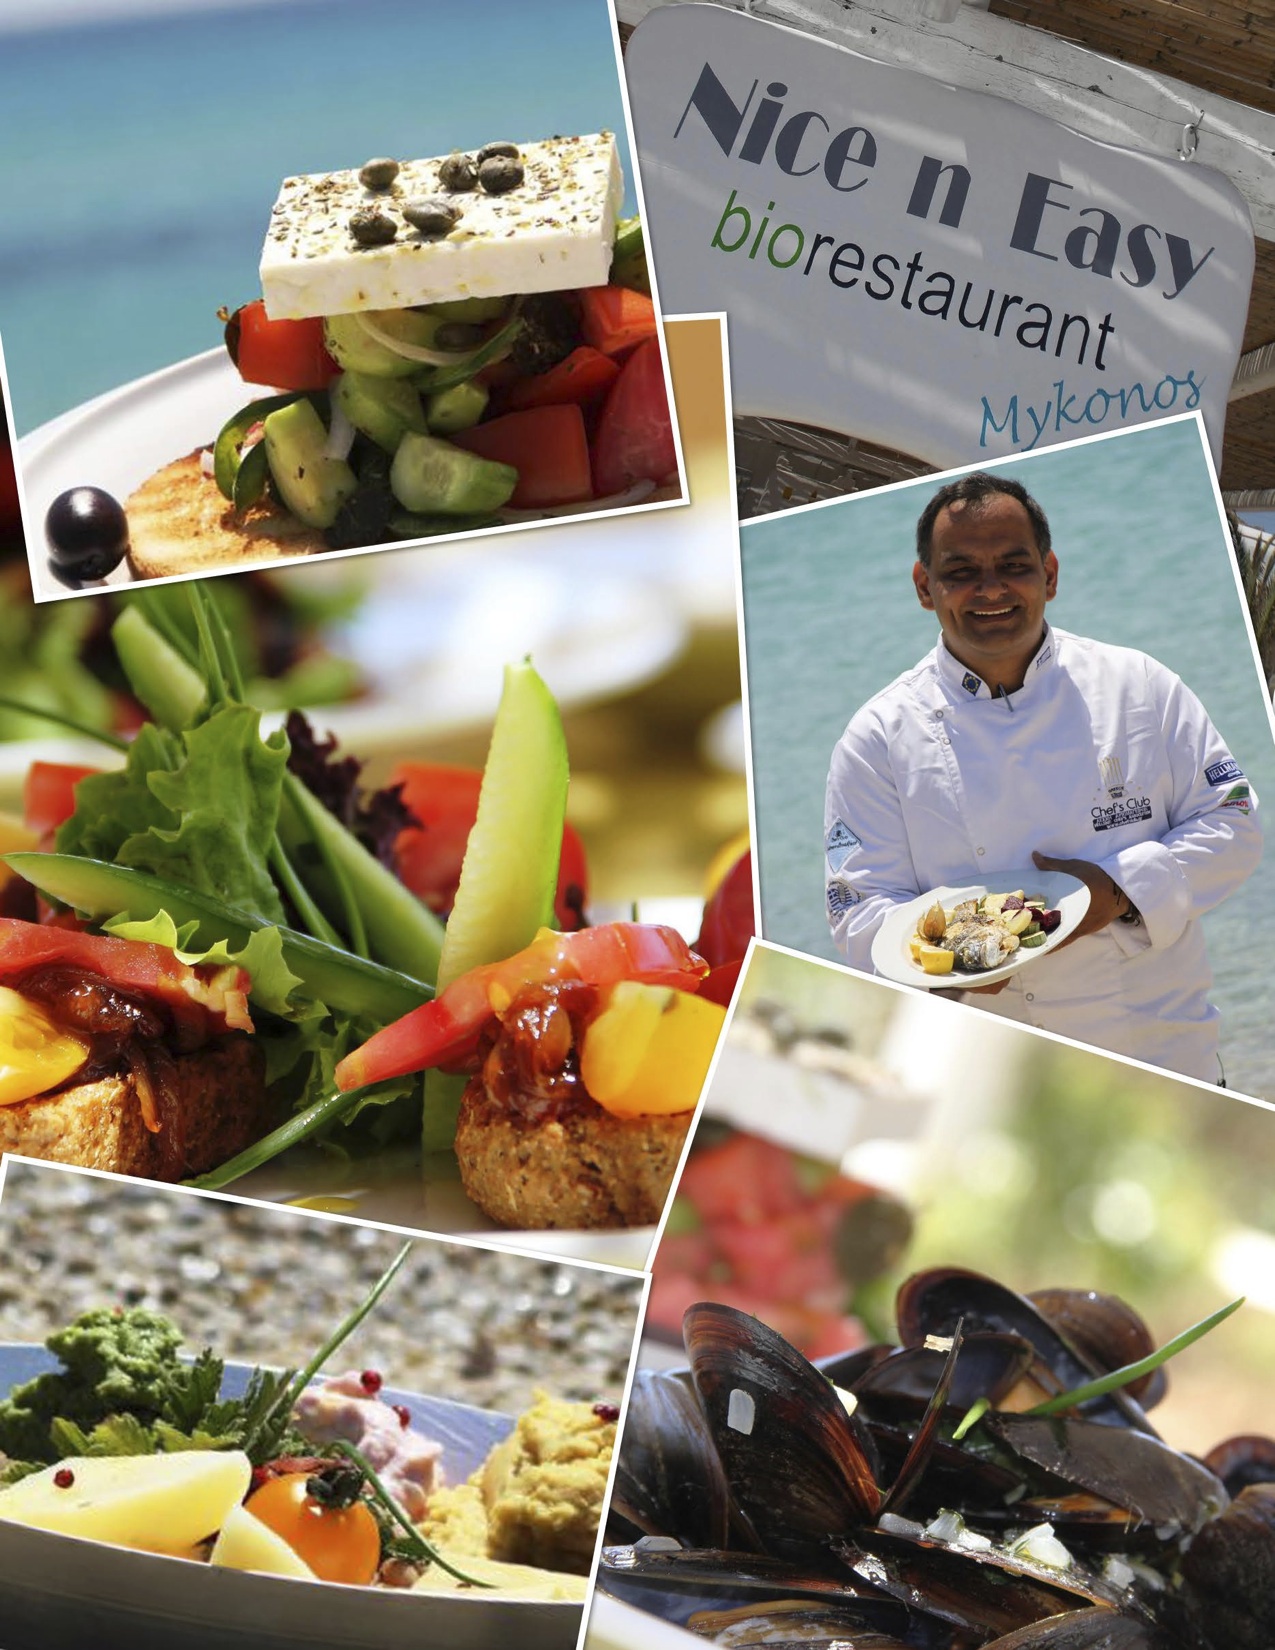 Chef Christos has created a variety of amazing dishes filled with bold flavors of the Mediterranean.